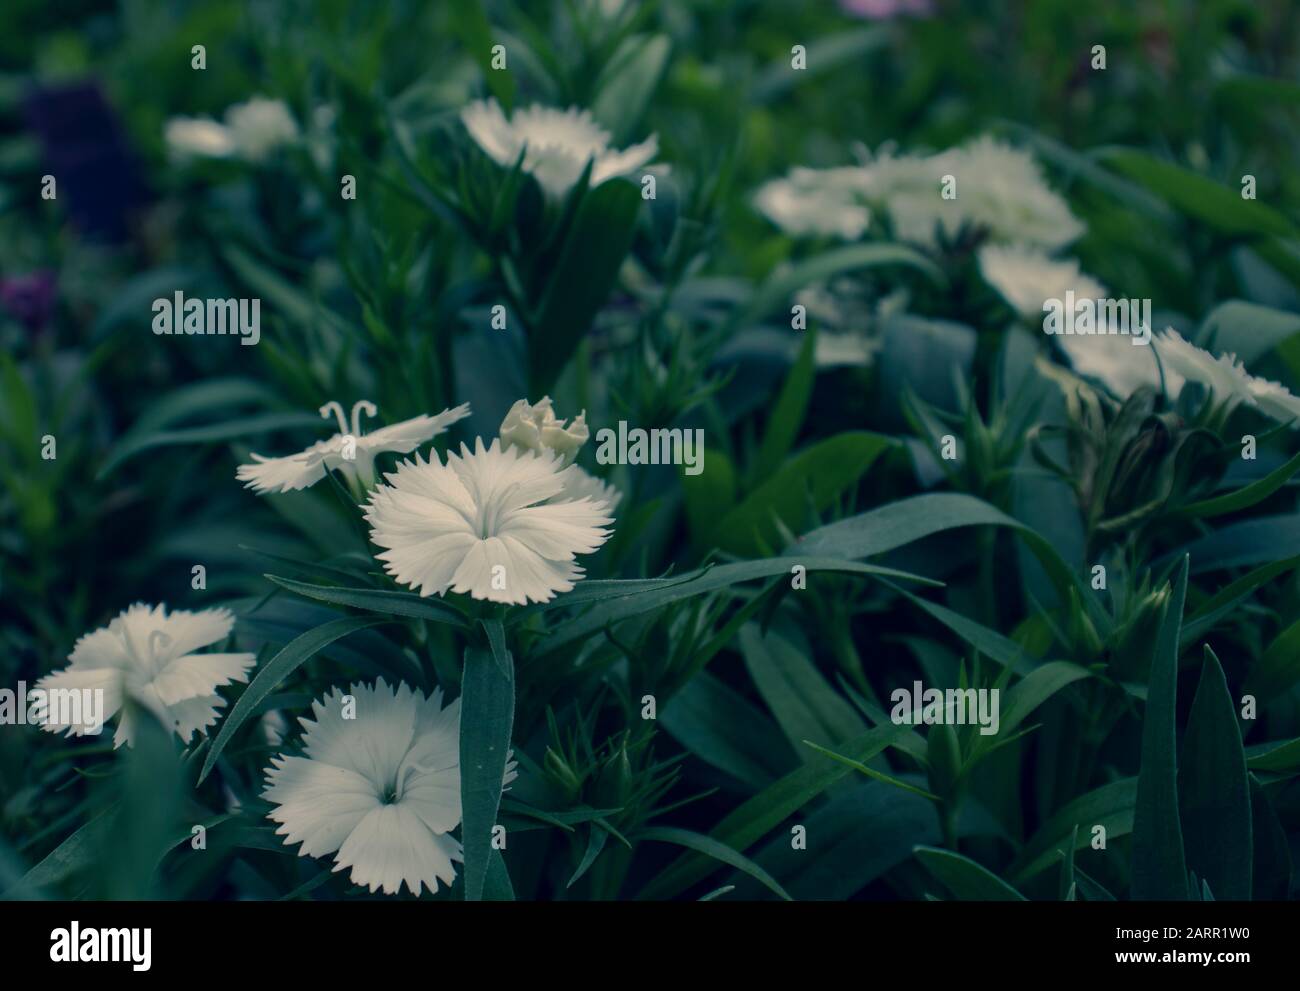 White Dianthus flower plant in bloom outdoors. Stock Photo